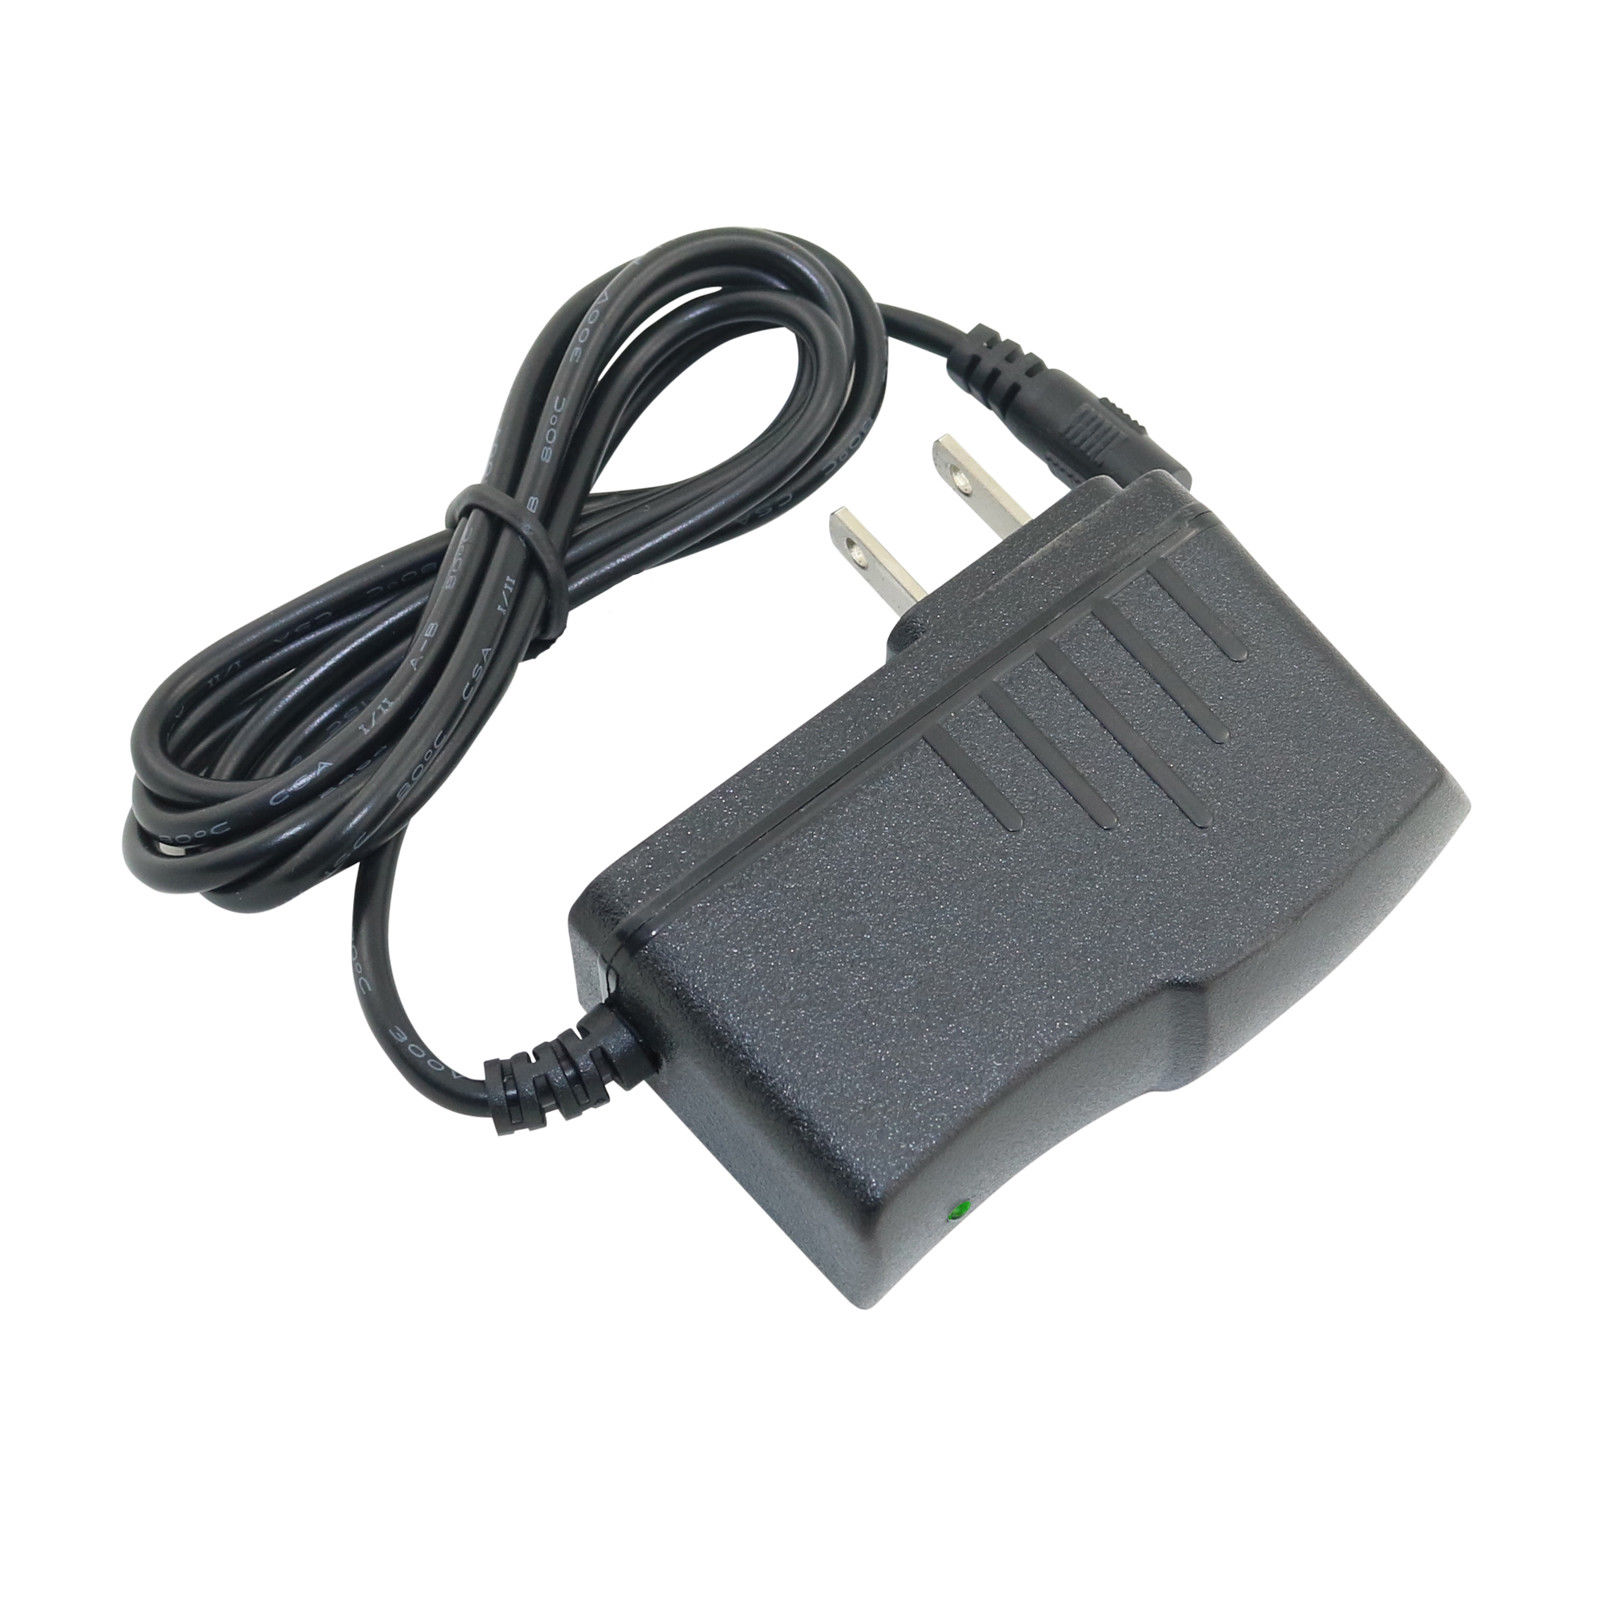 Brand new 12V AC Adapter Charger Power Supply Cord For Roku 2 Streaming Media Player 4210X Roku 3 (4